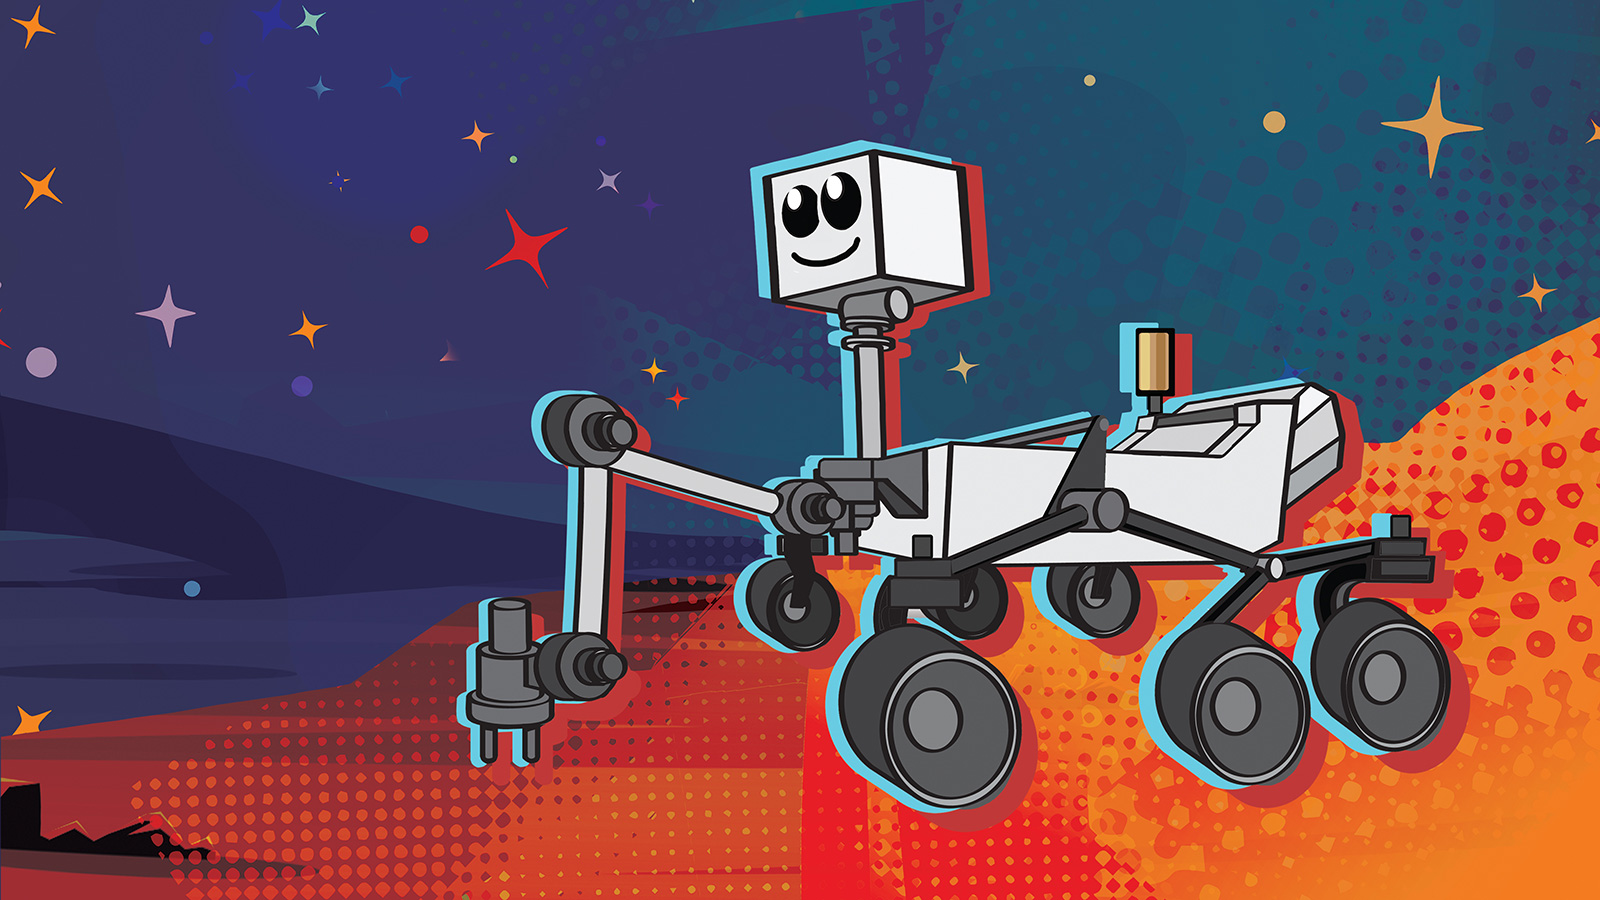 This illustration depicts NASA's next Mars rover, which launches in 2020